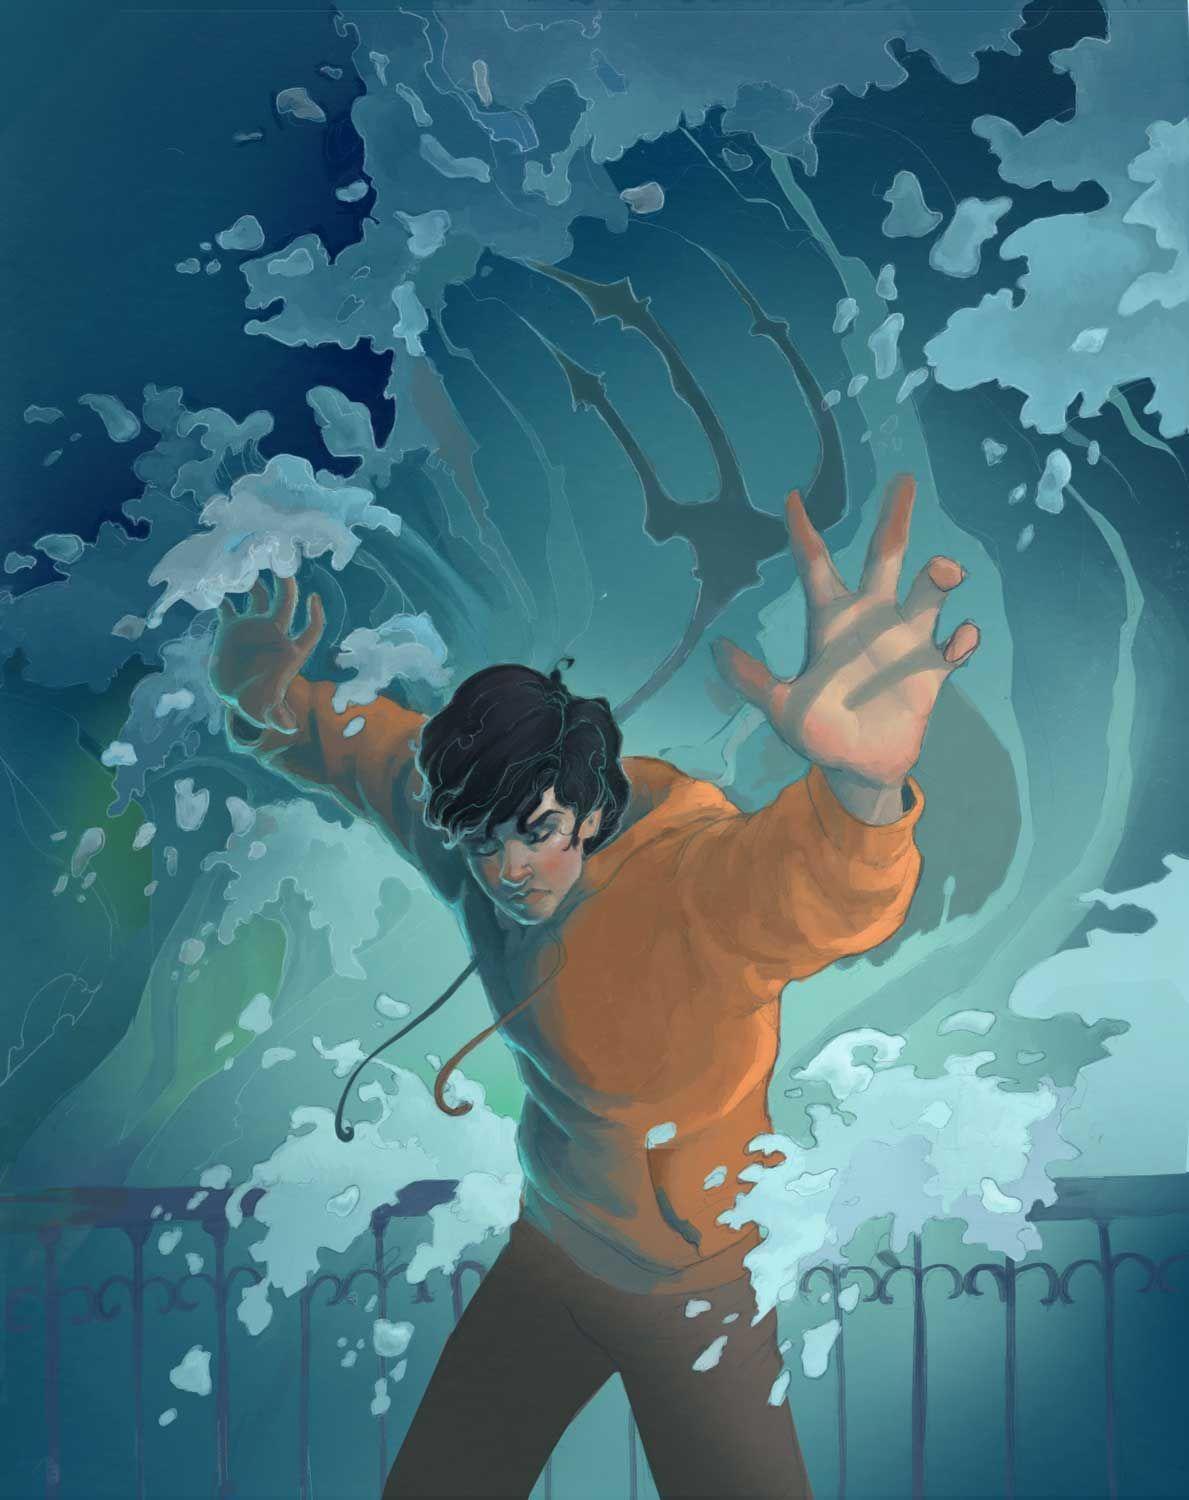 Another anime Percy Jackson pic